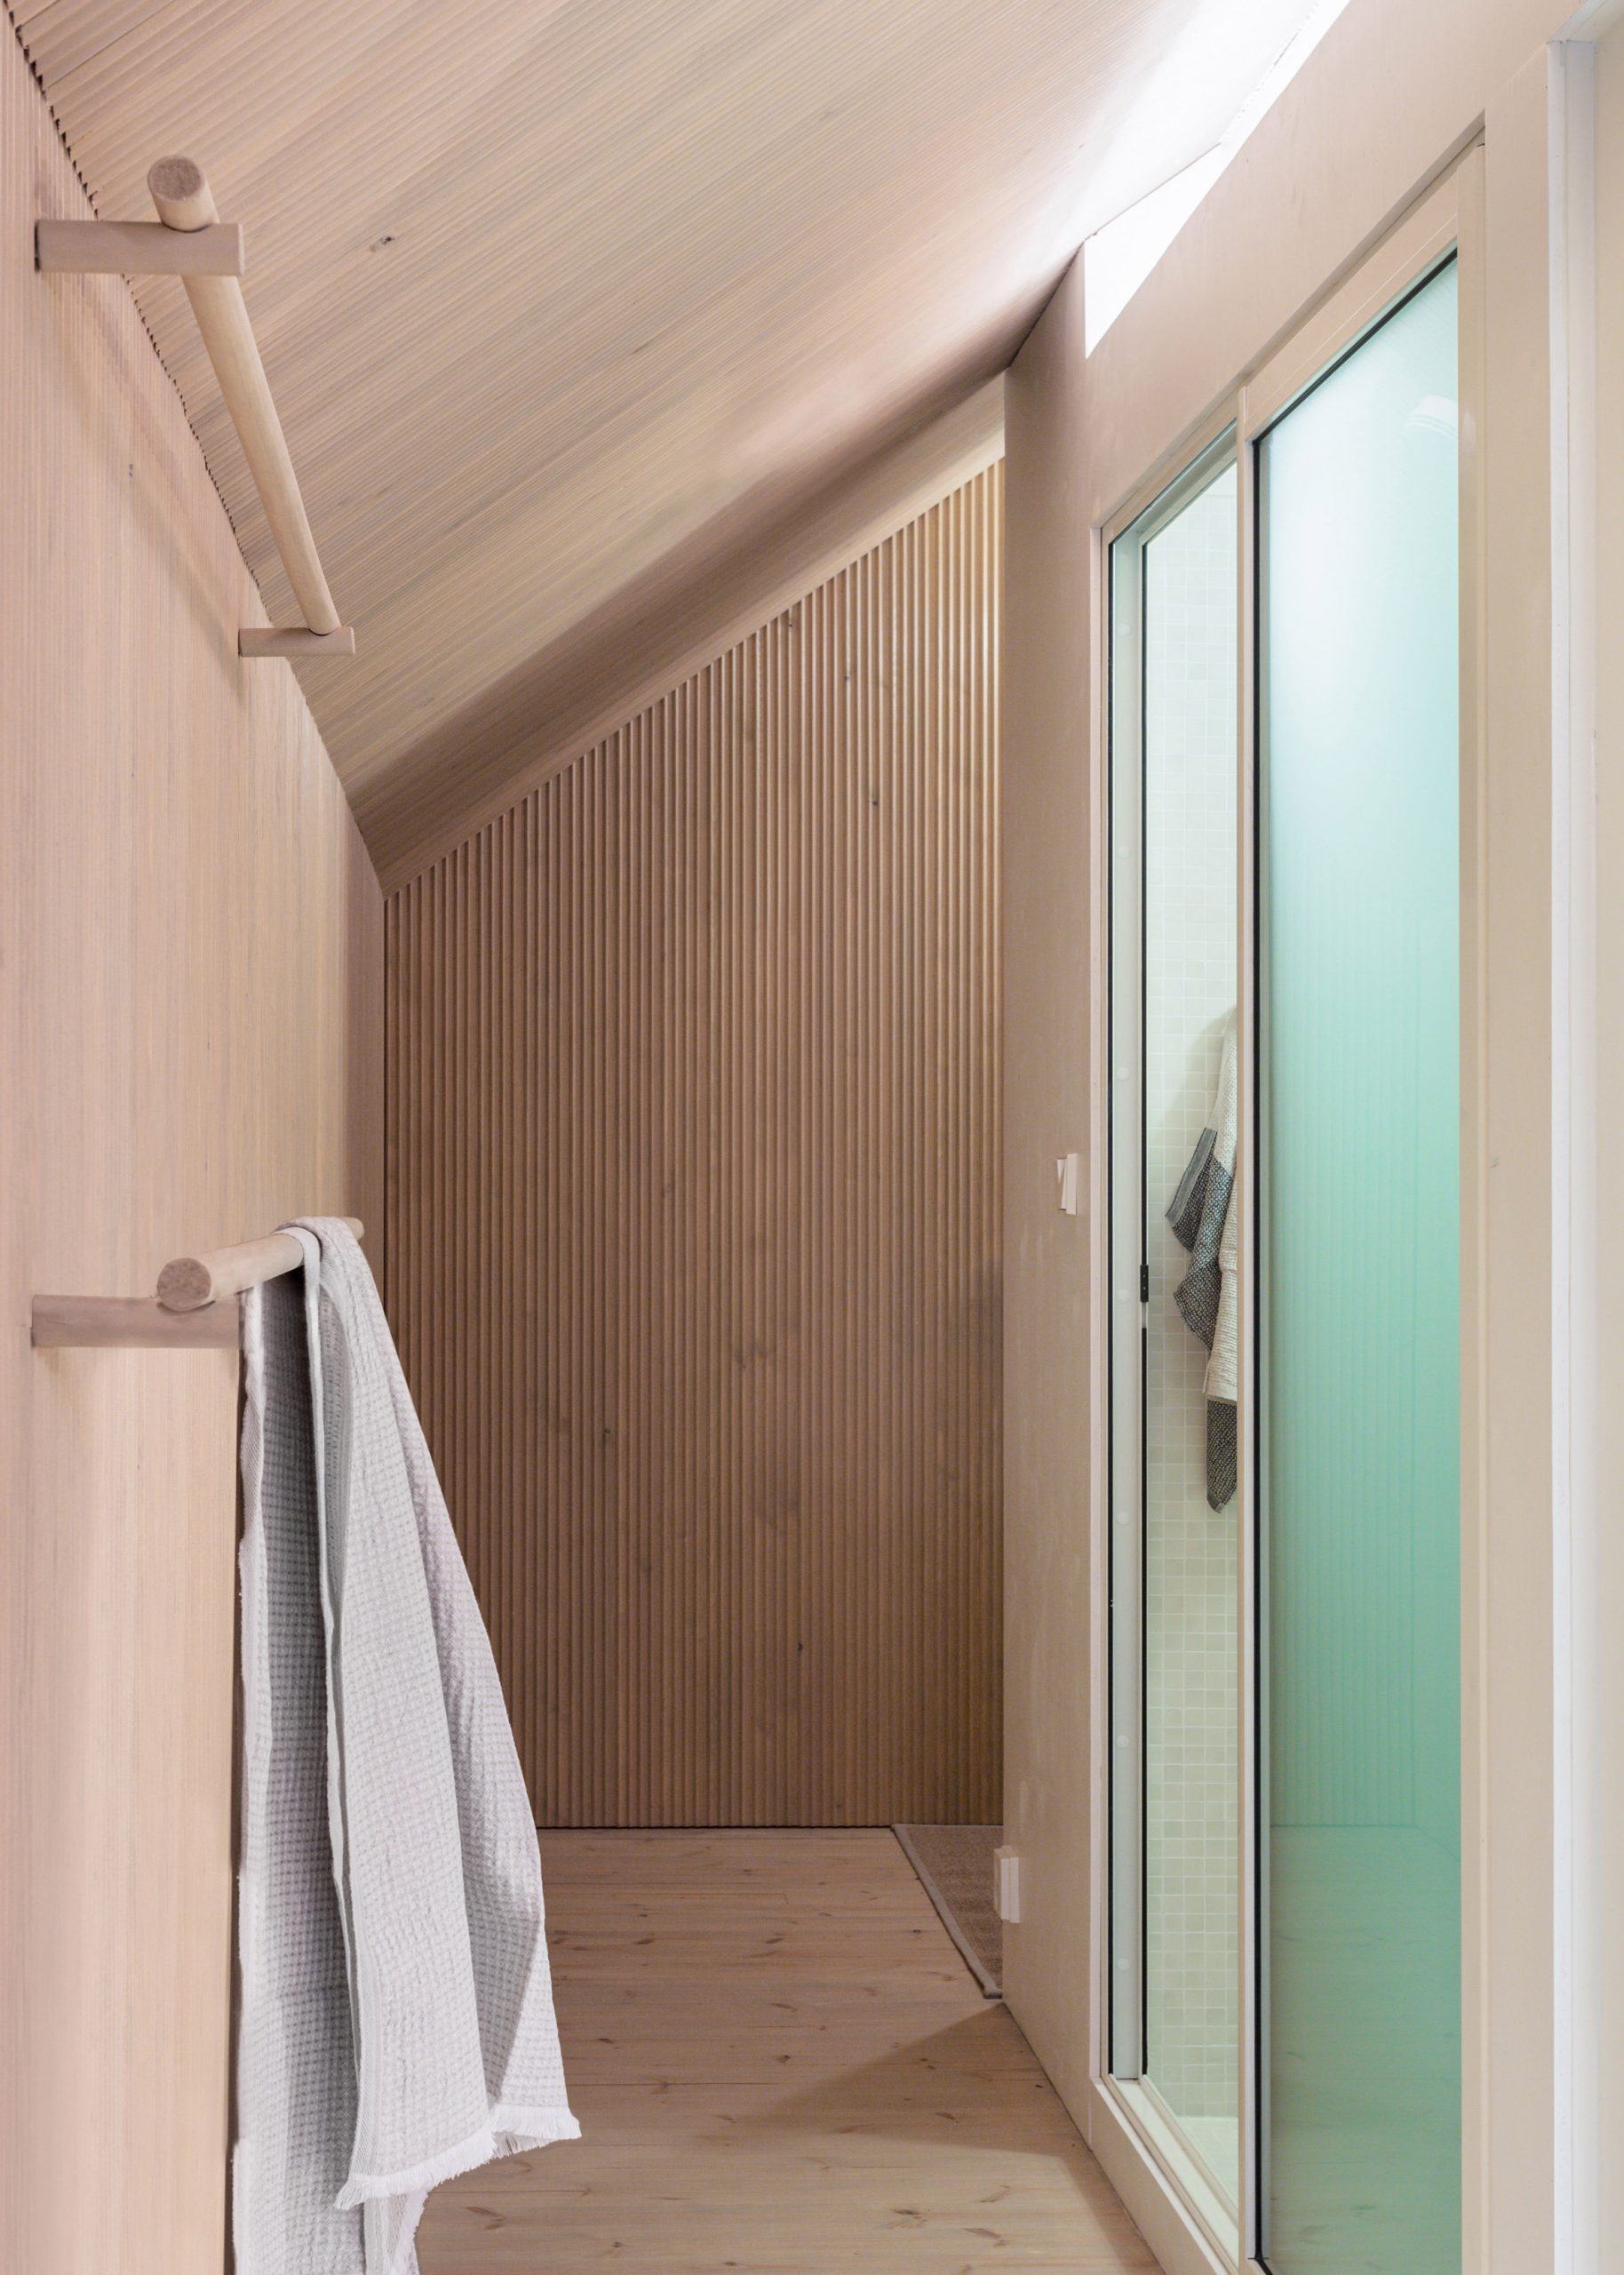 Shower room with wooden walls